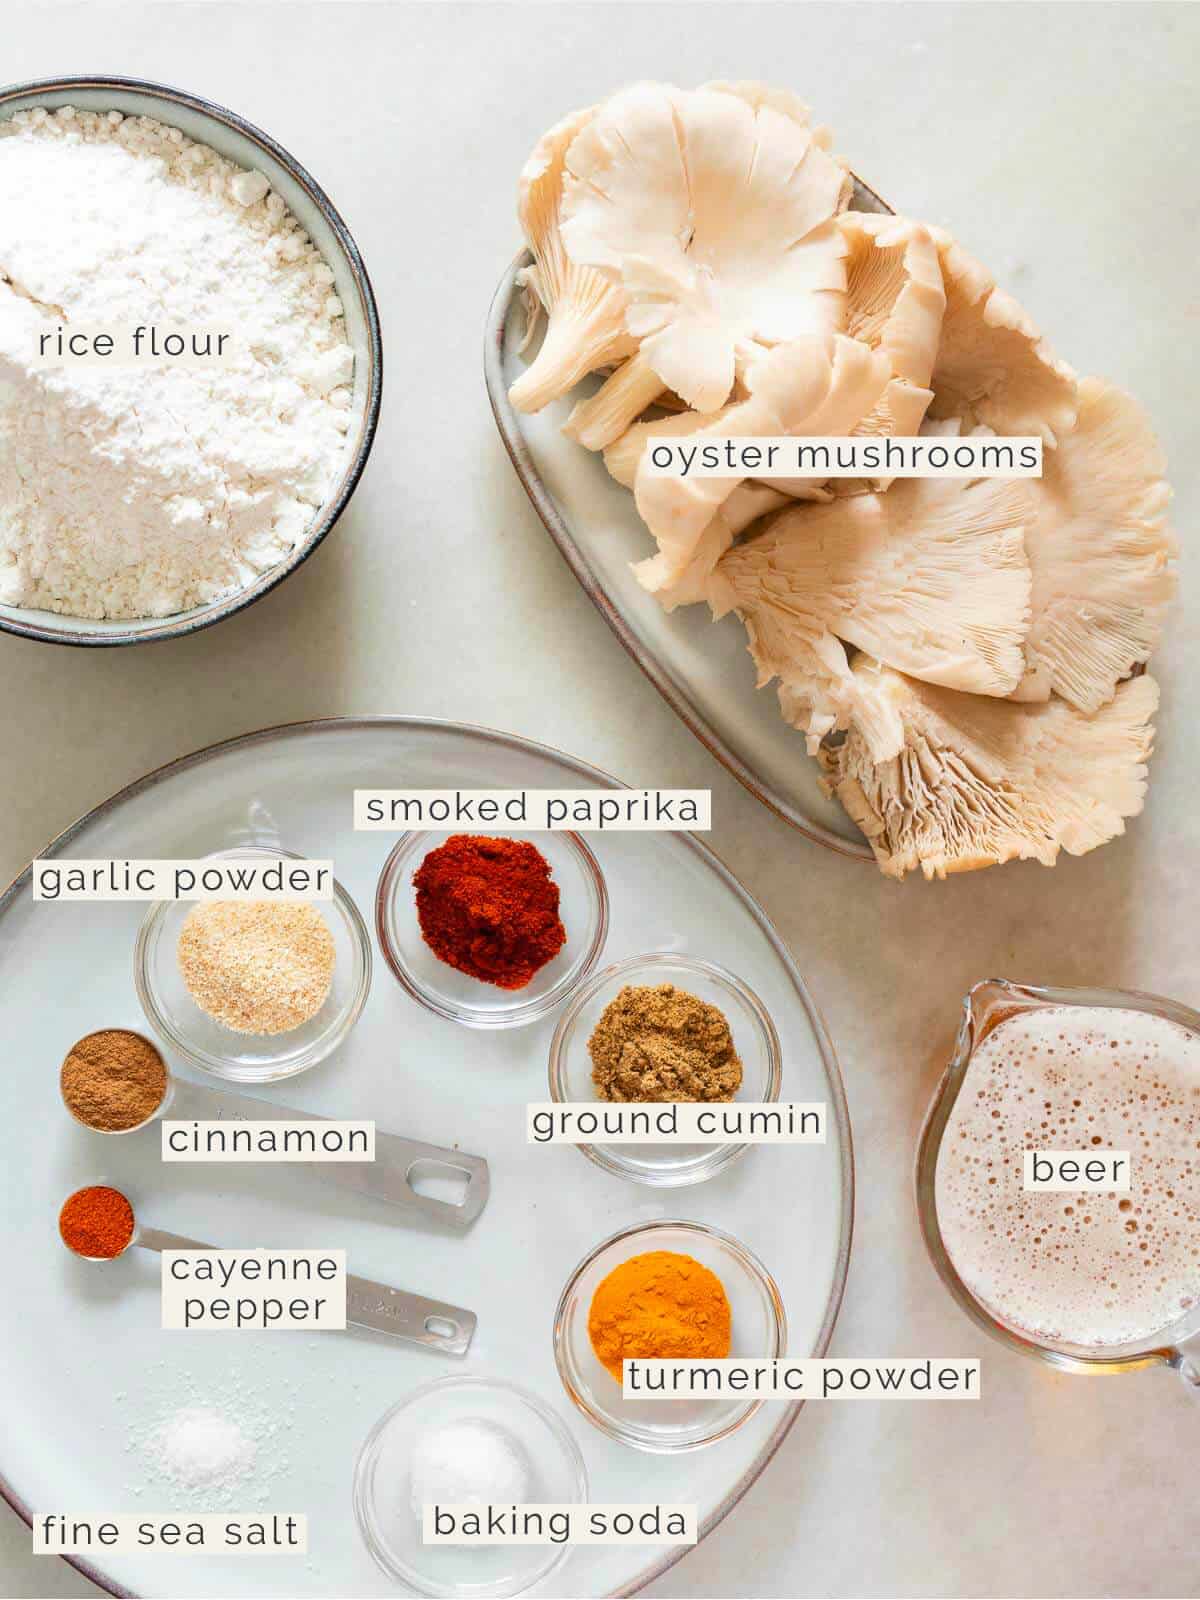 labeled ingredients to make the crunchy oyster mushroom recipe.